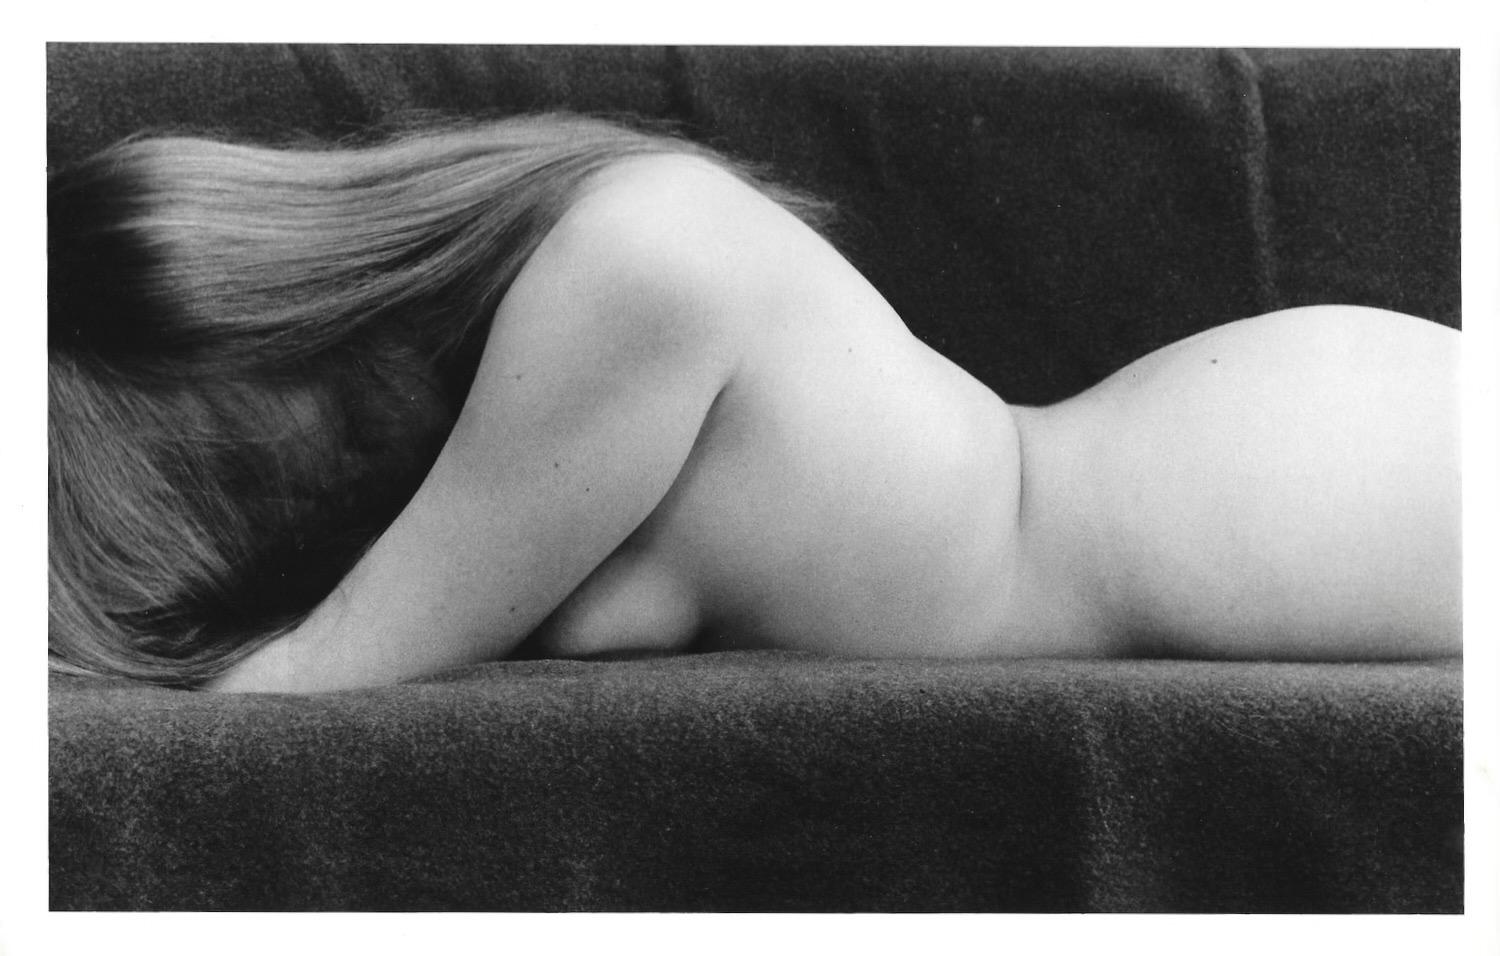 Larry Colwell Nude Photograph - Black & White Monochrome of a Female Nude by Contemporary American Photographer